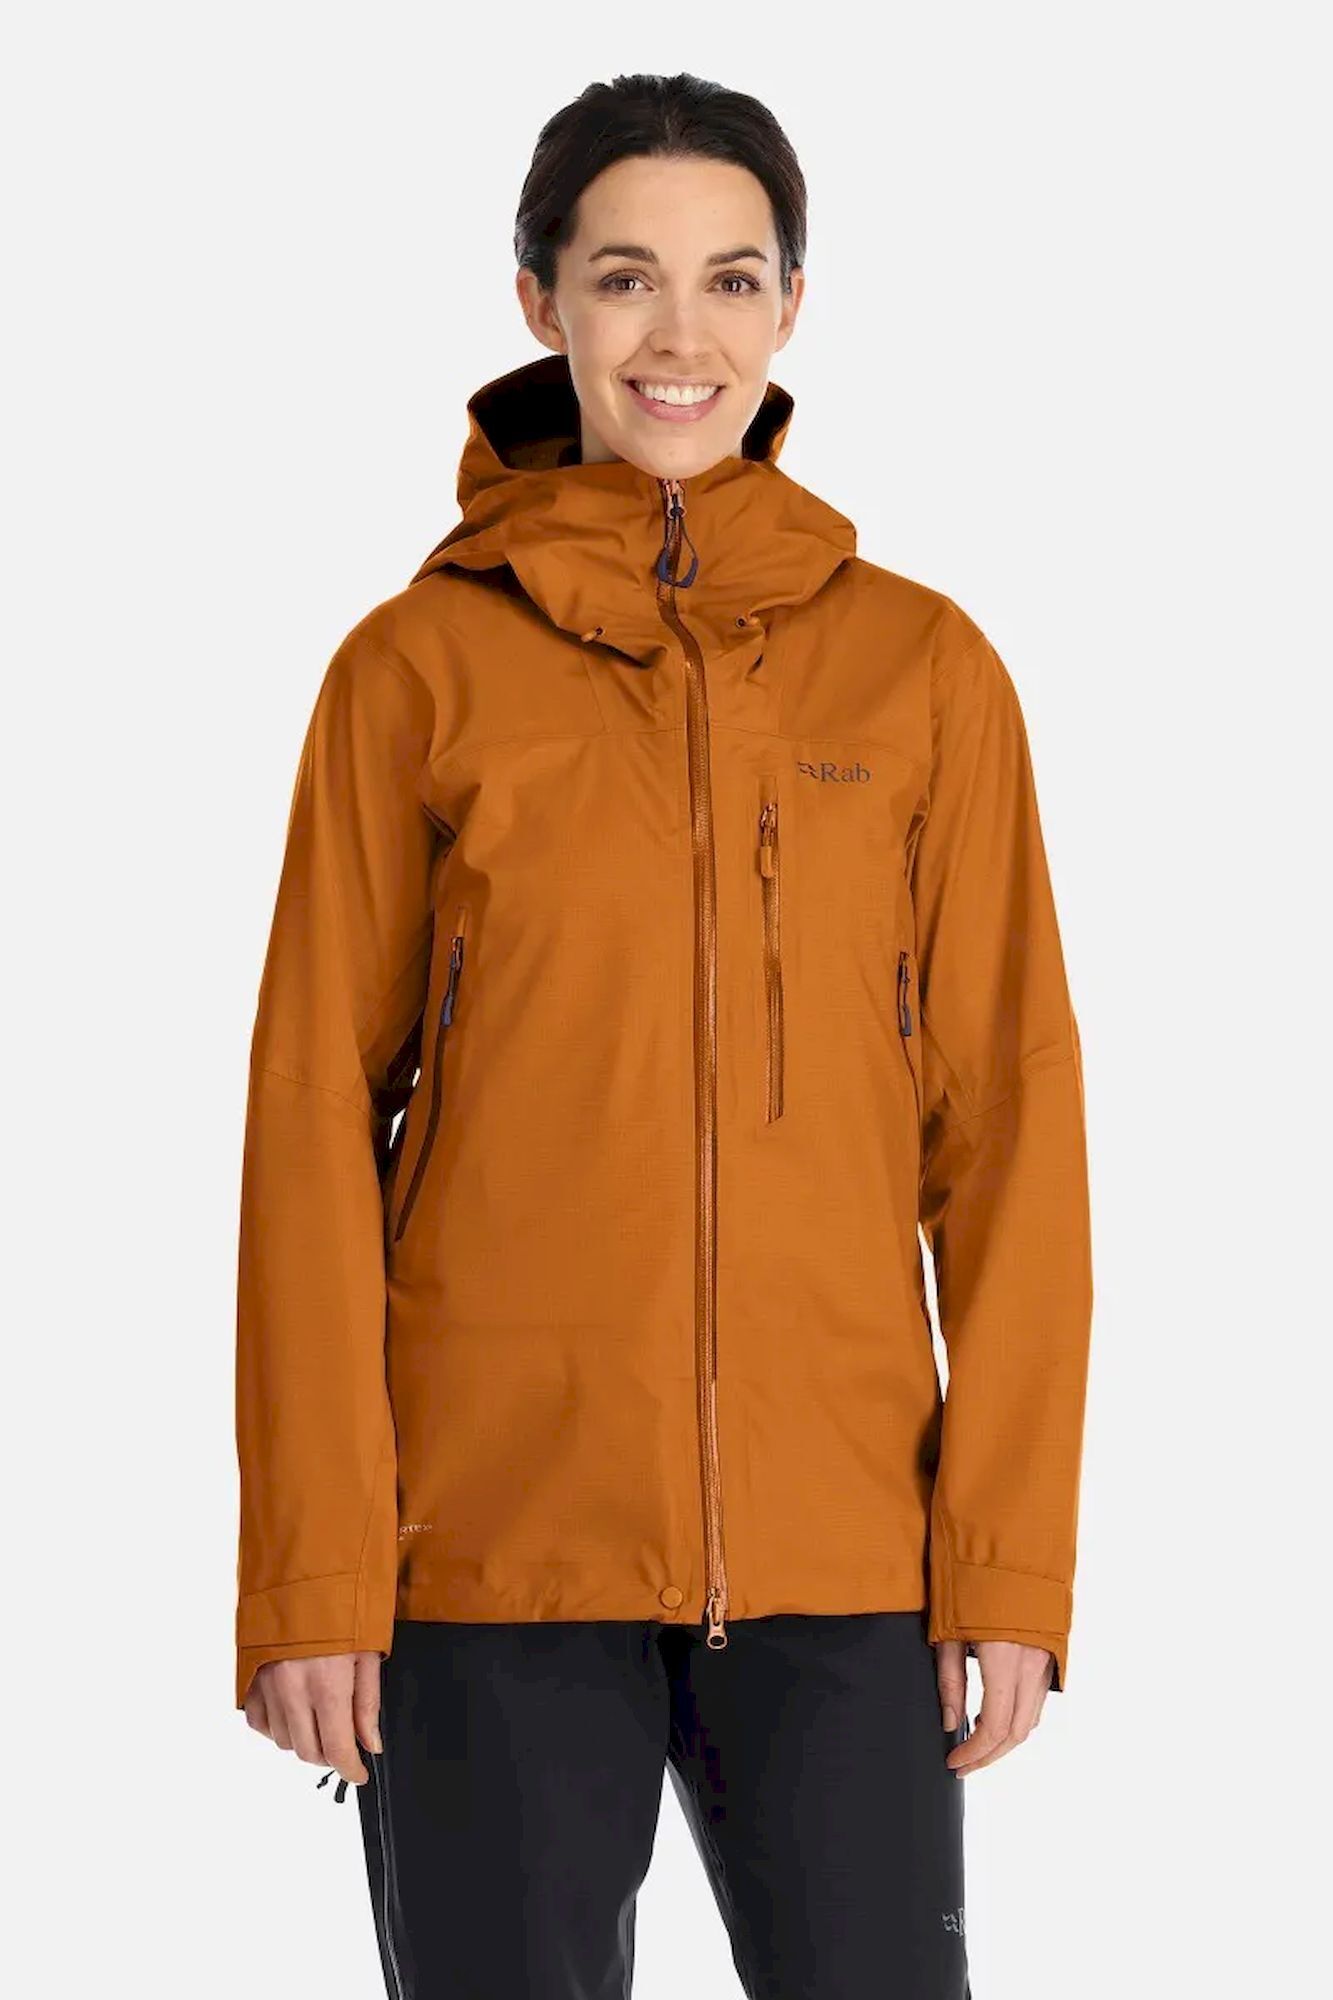 Rab Women's Firewall Jacket - Chaqueta impermeable - Mujer